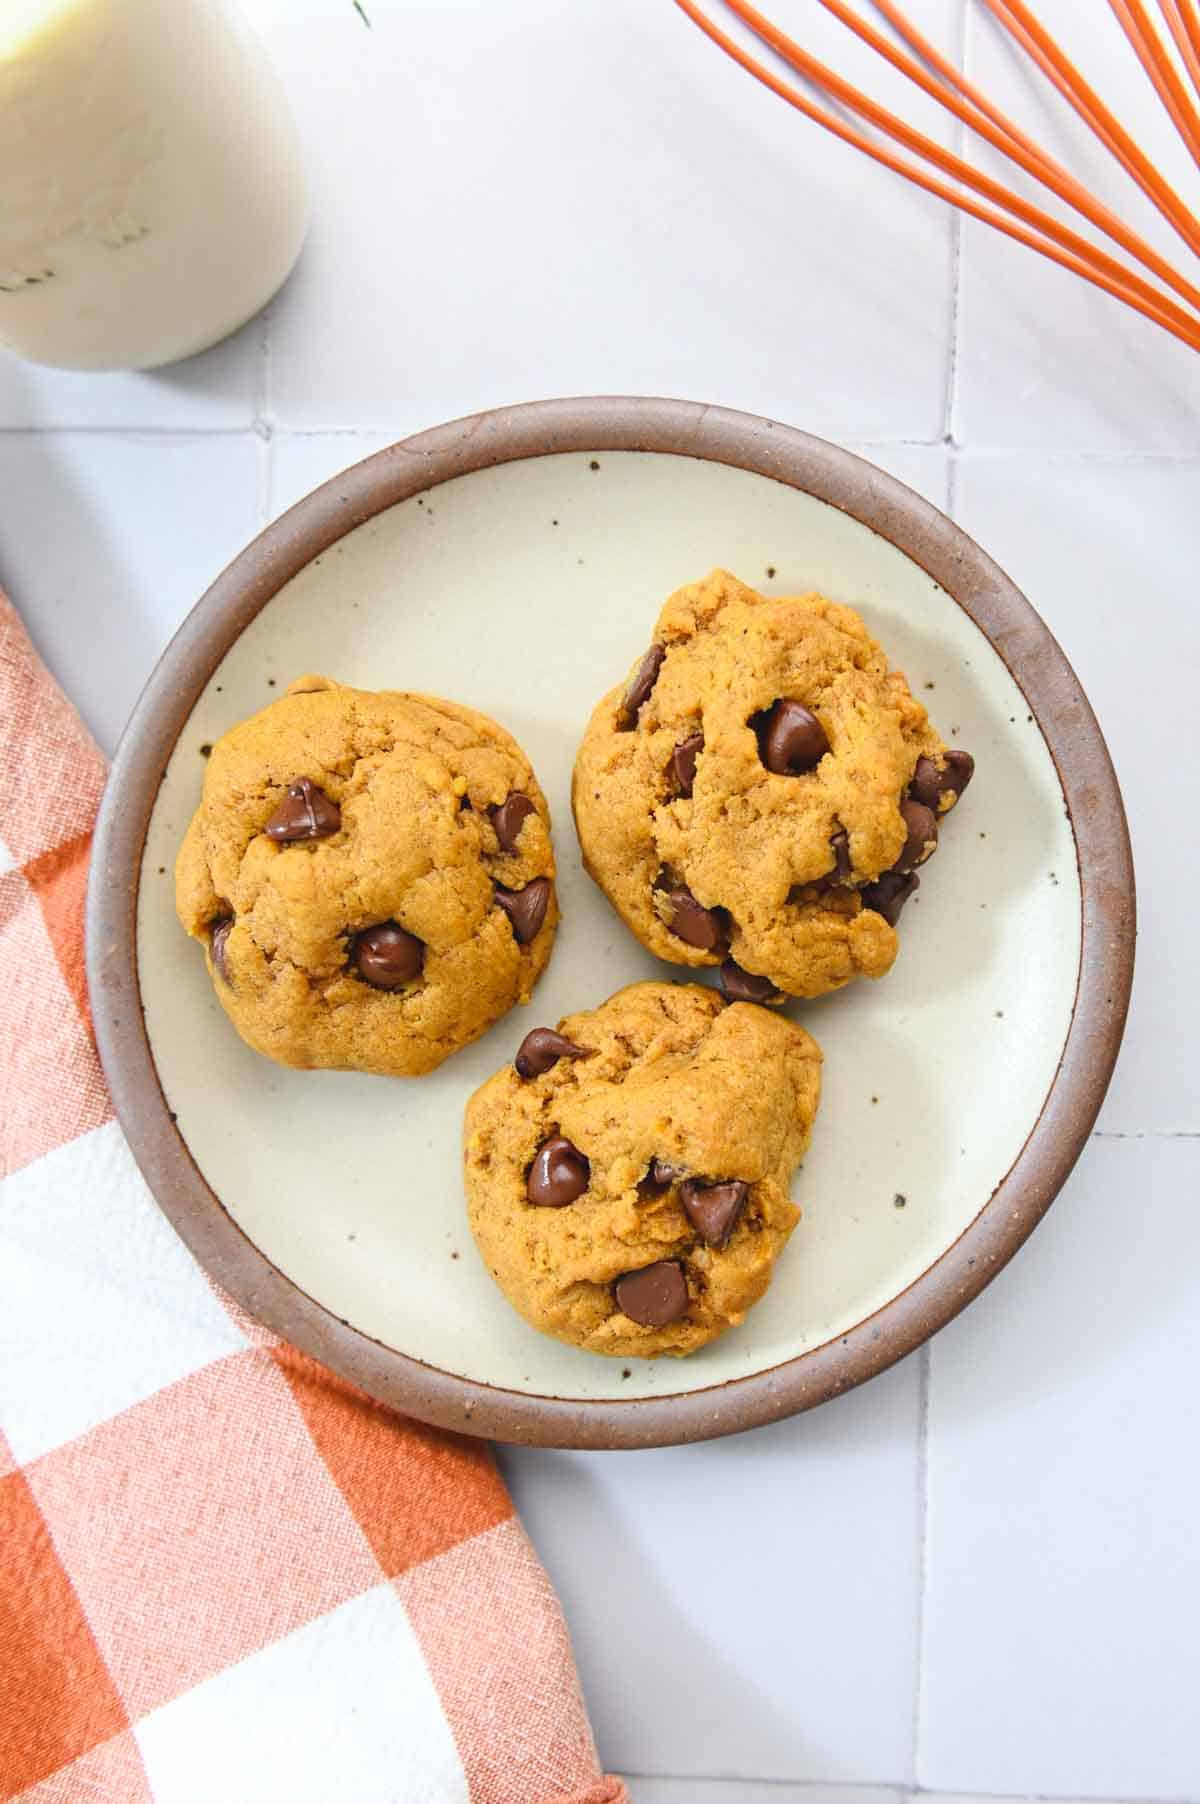 A photo of 3 pumpkin chocolate chip cookies on a brown plate.